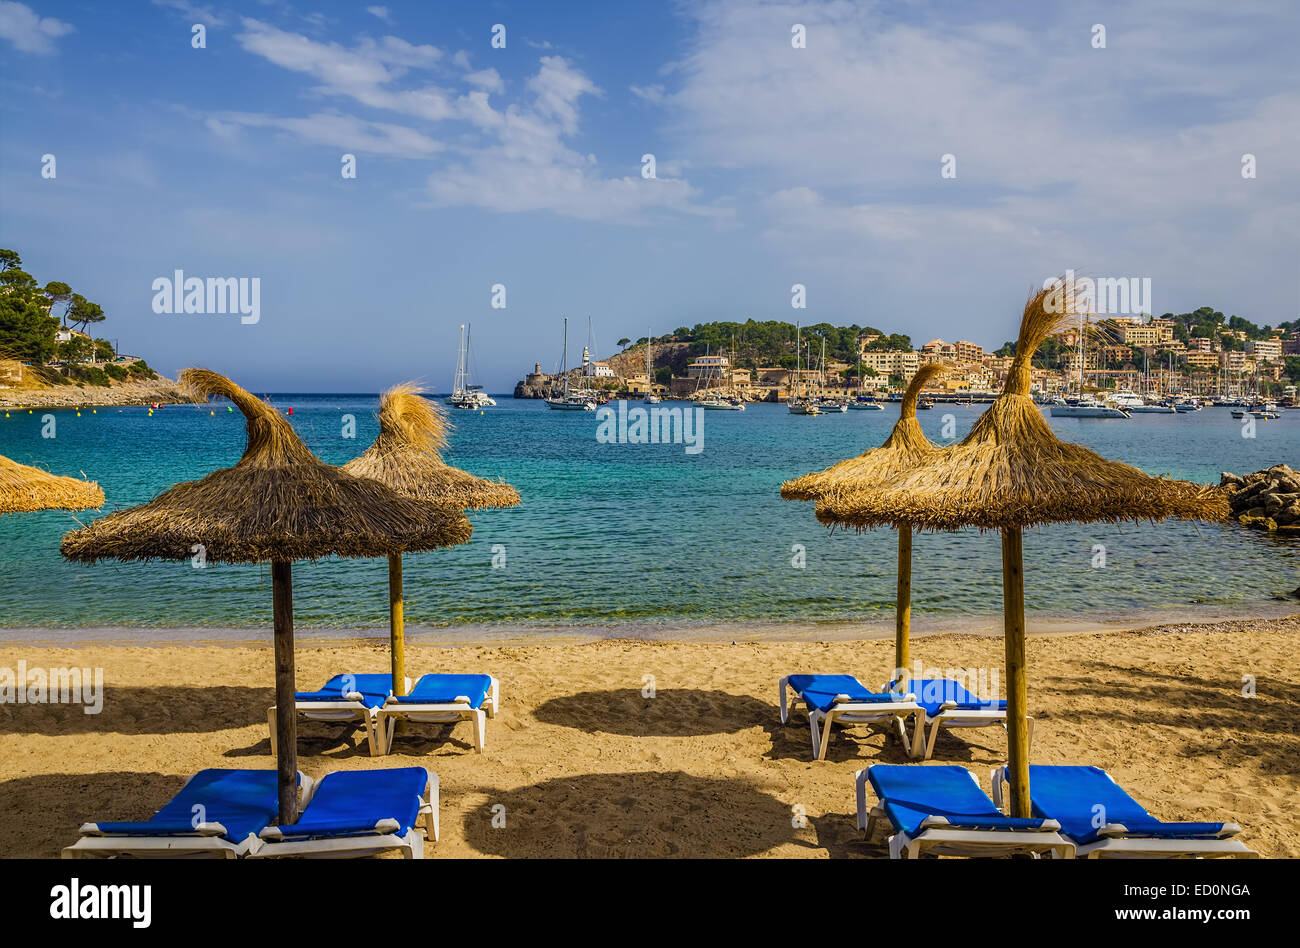 Tropical lounge chairs and umbrellas on a sandy resort beach in Port de Soller, Mallorca, Spain. Stock Photo